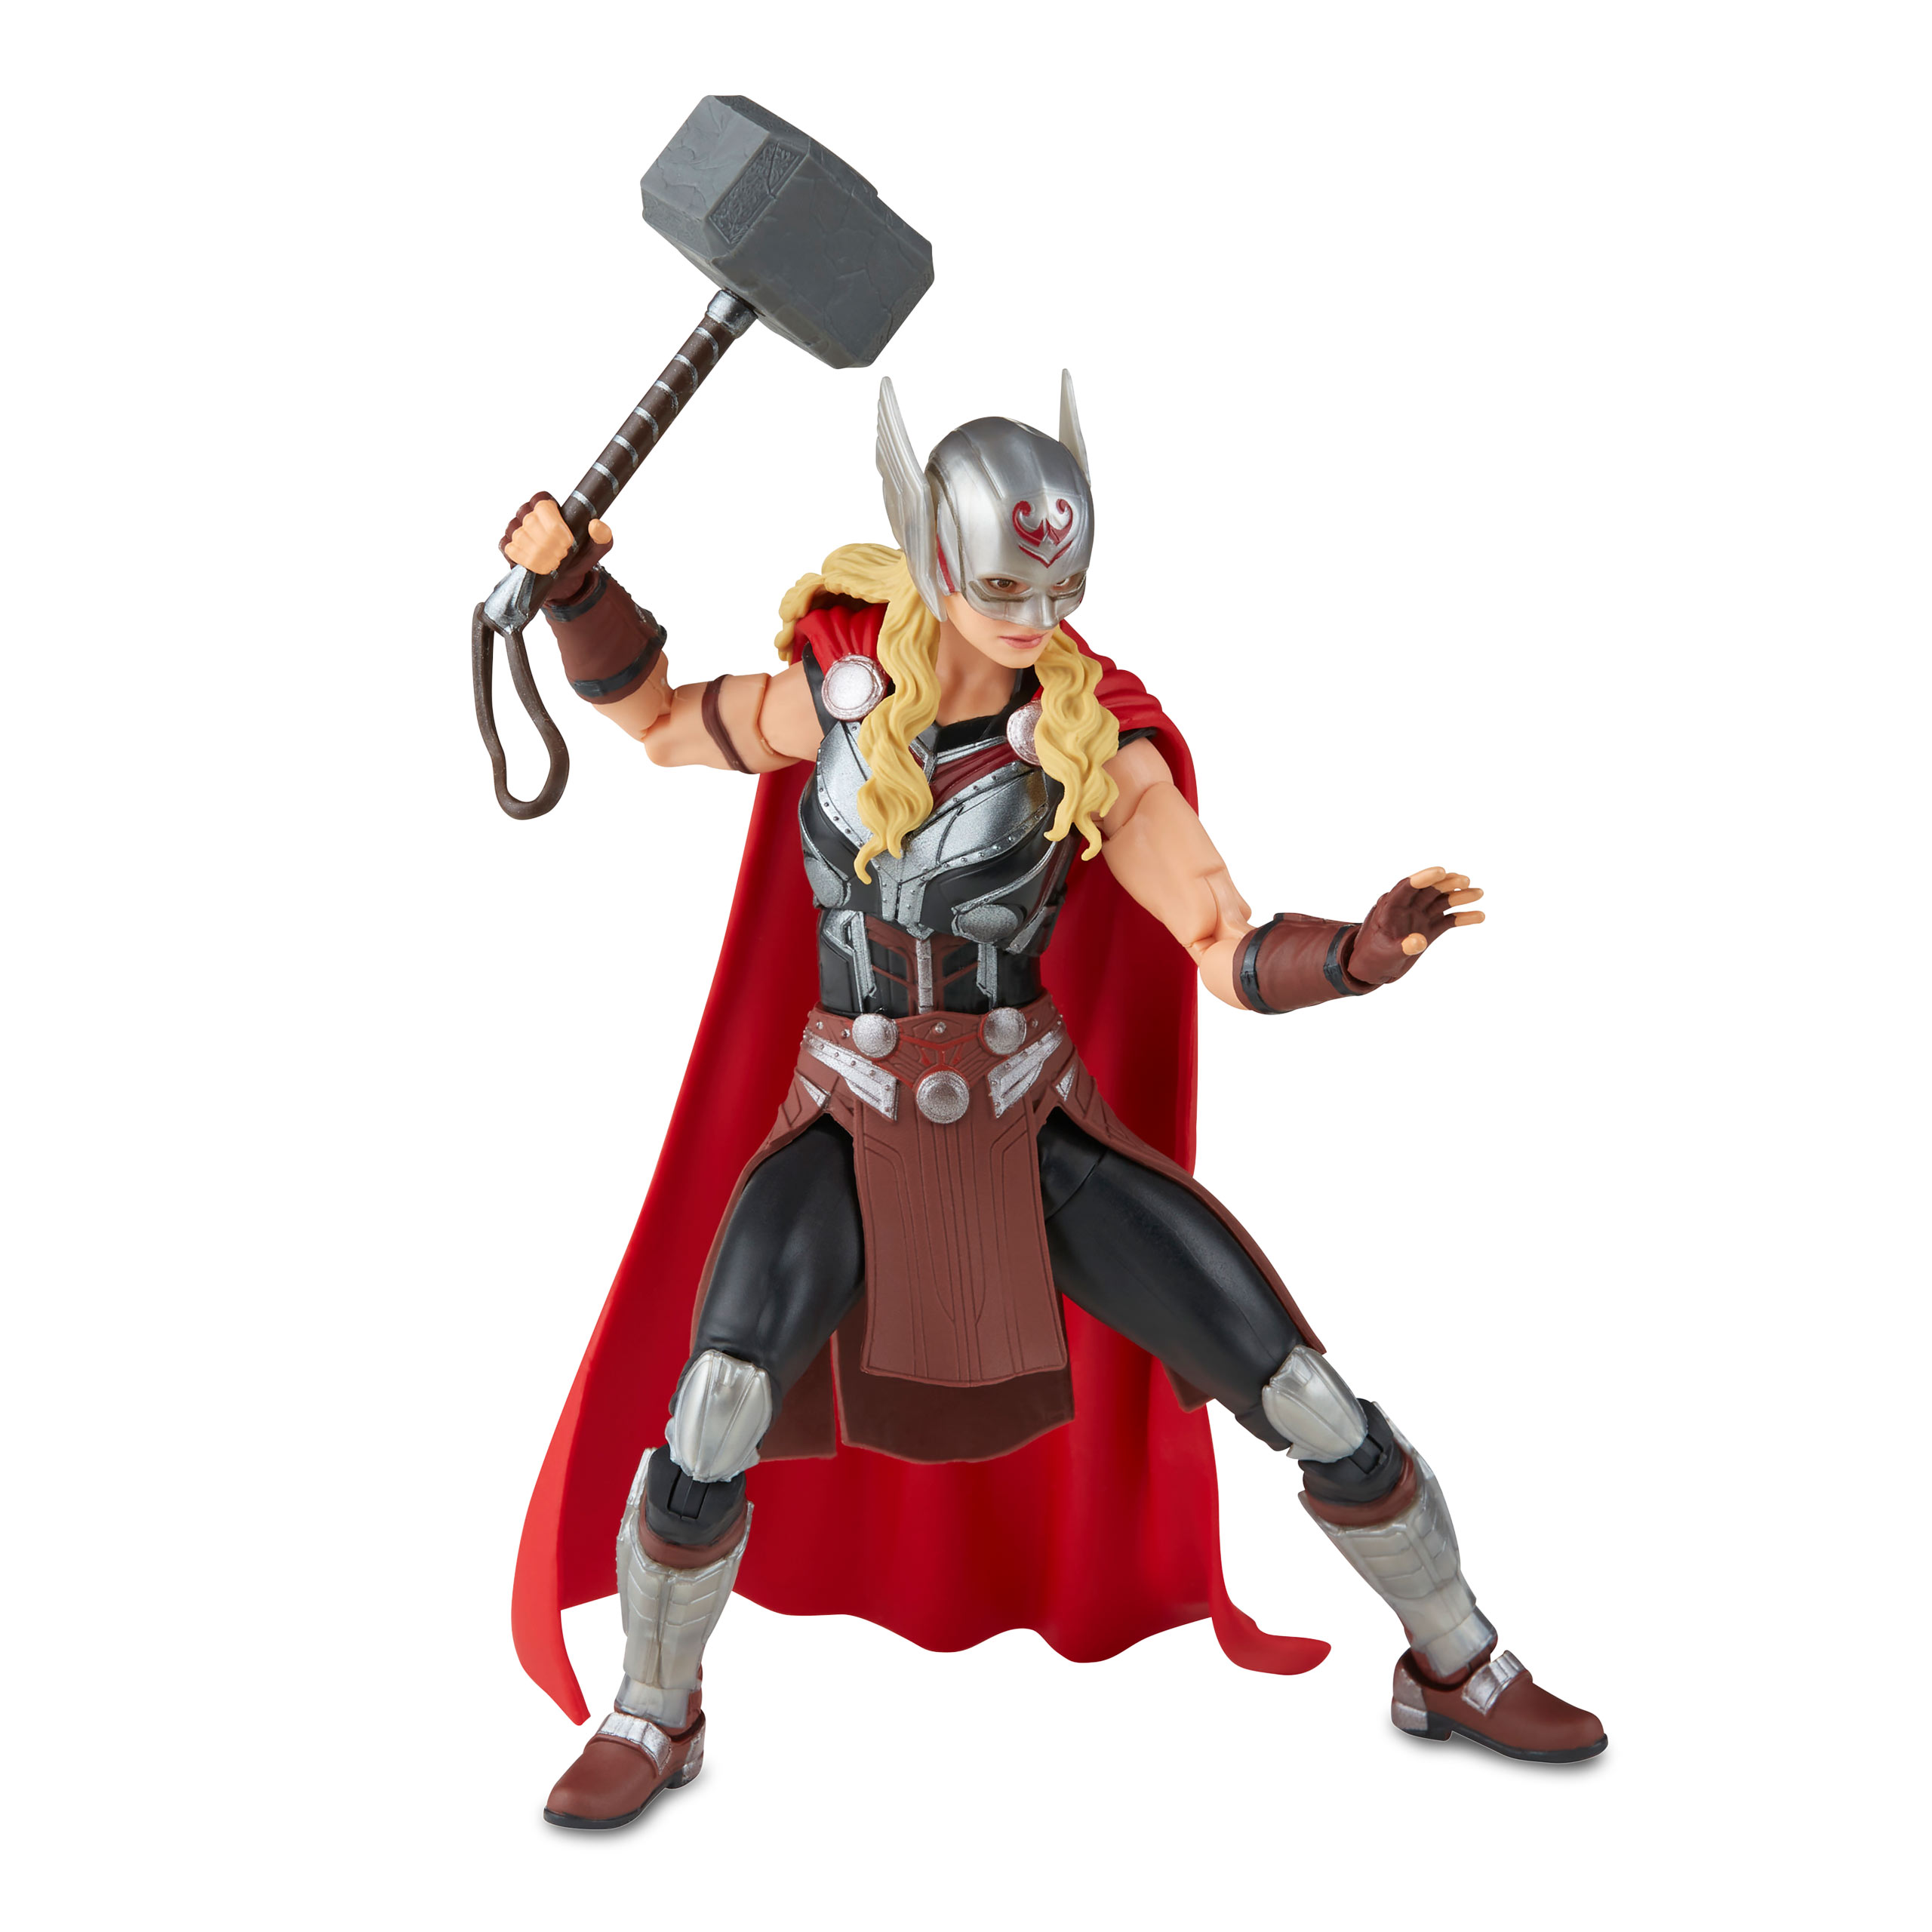 Thor: Love and Thunder - Mighty Thor Action Figure